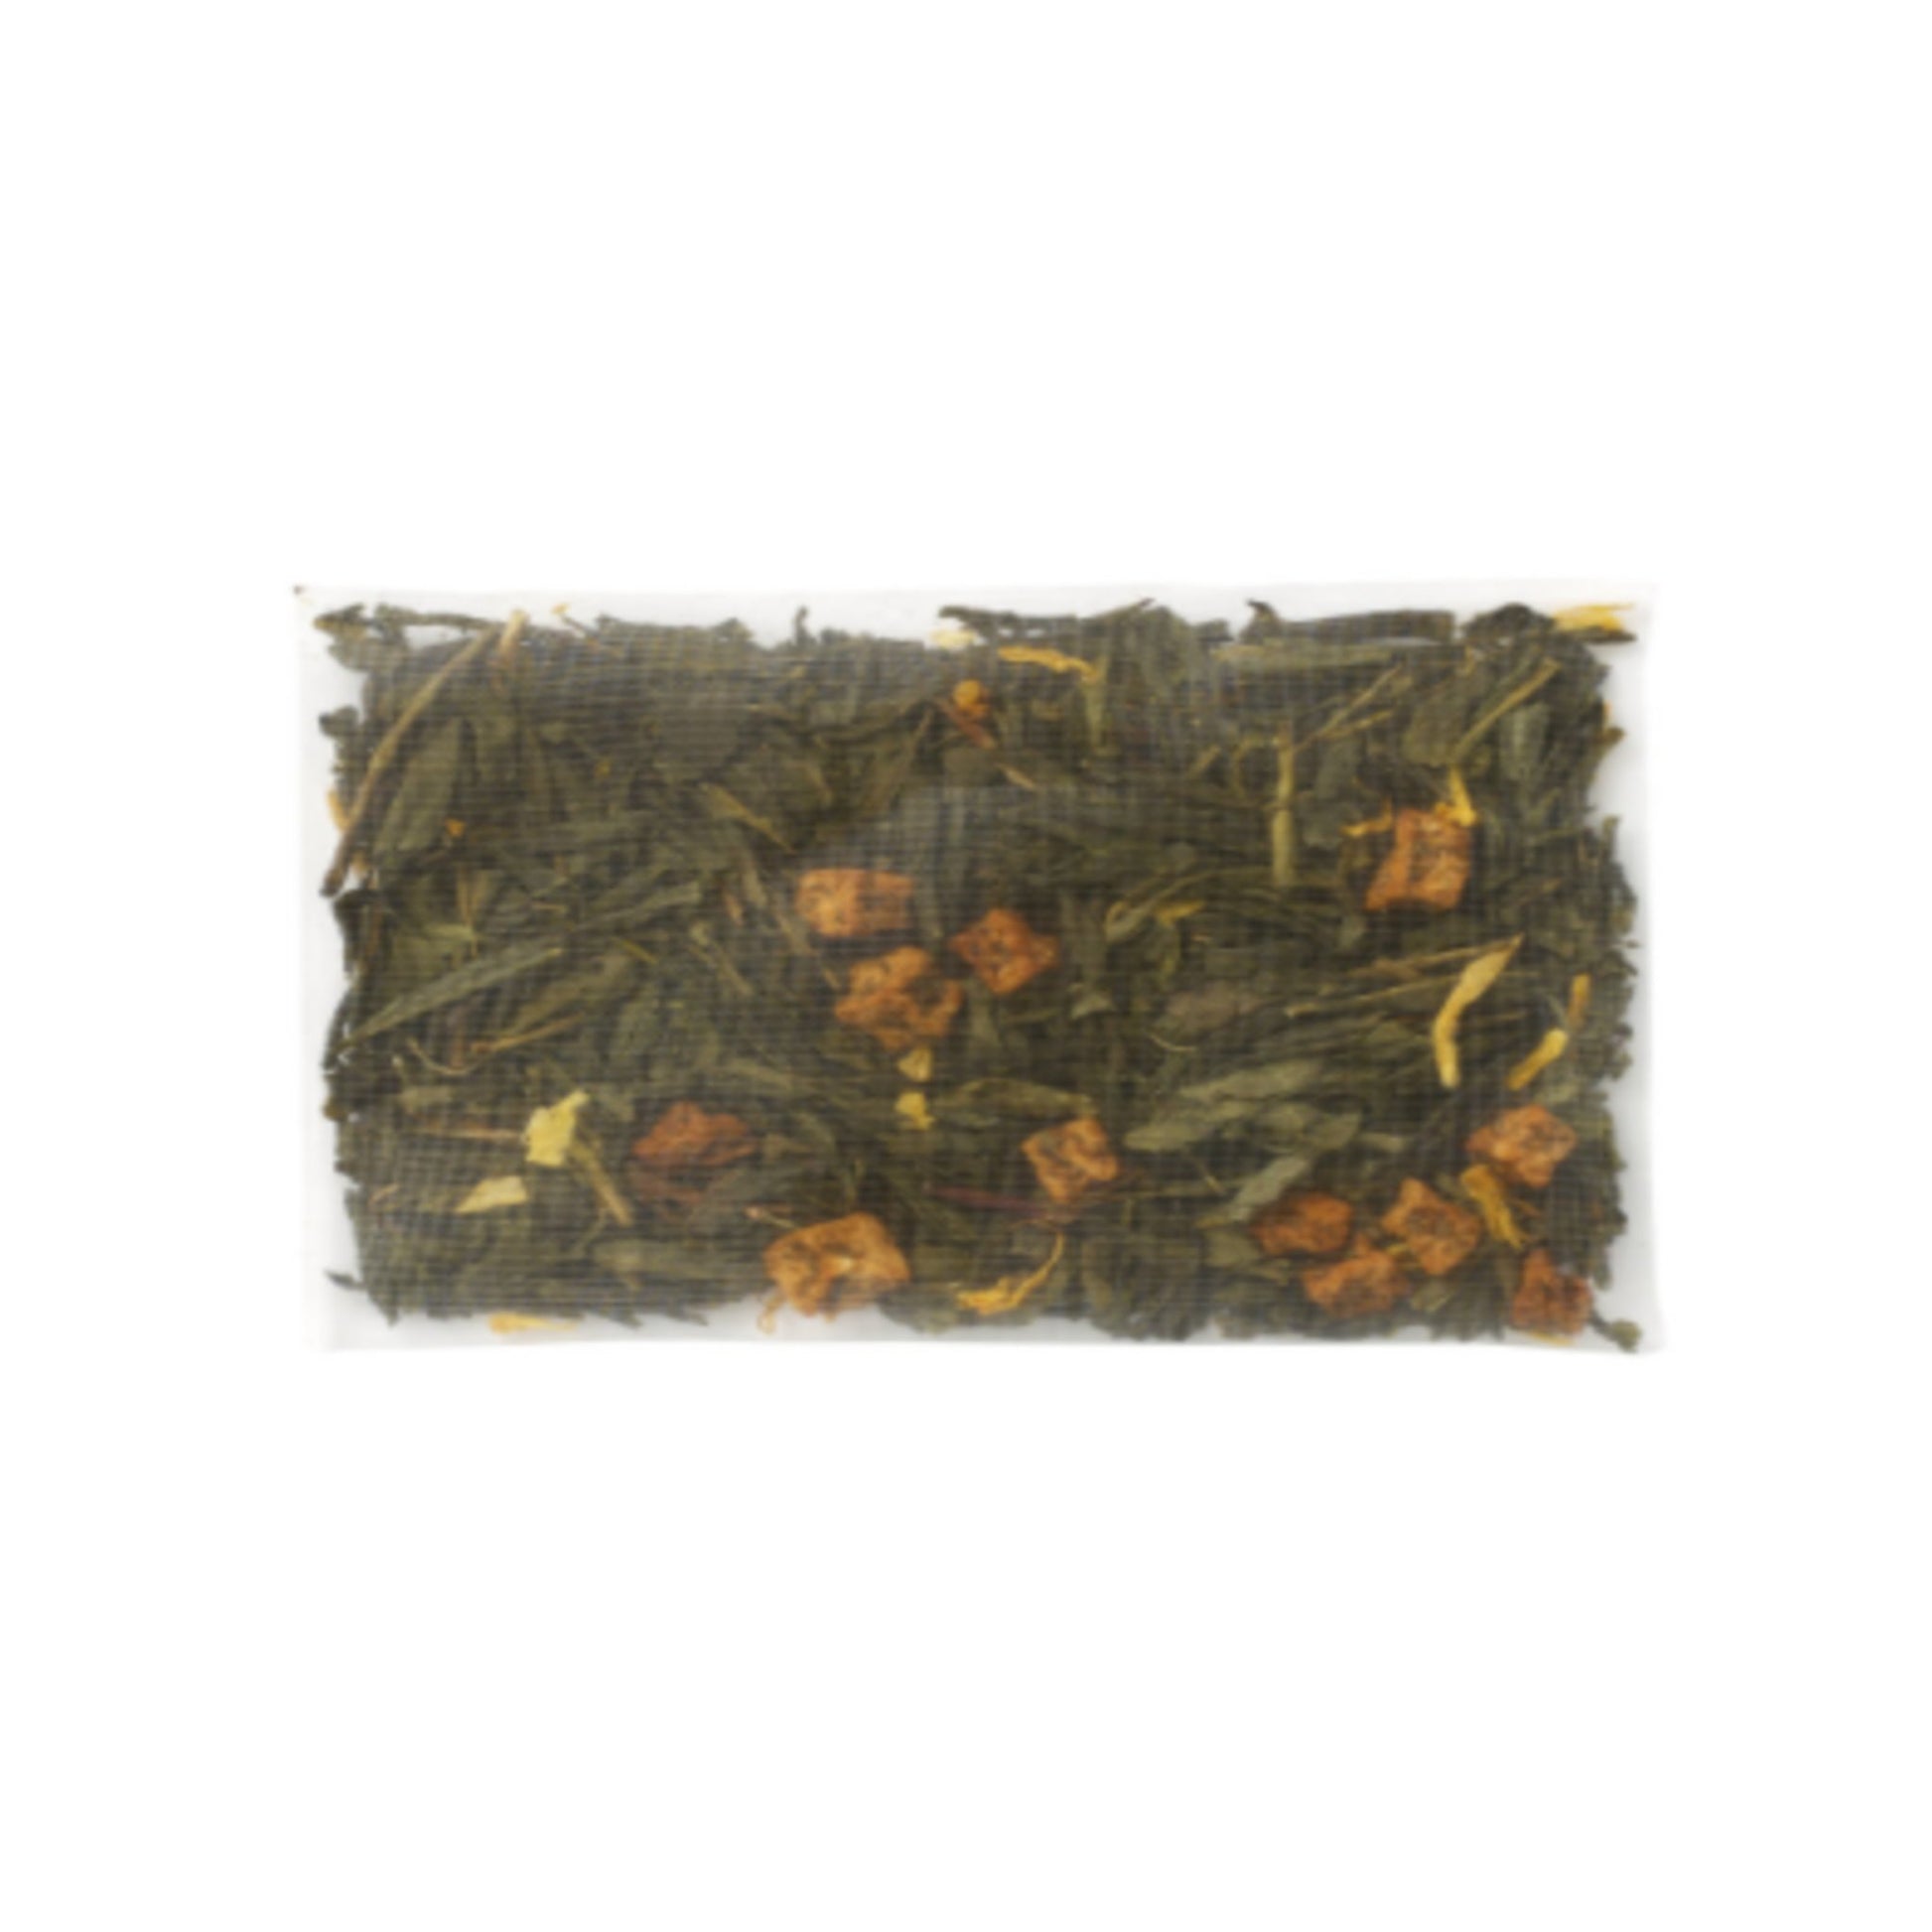 Mango Green Iced Tea Bags, available in quantities of 1, 6 or 12 quart size pouches Tea & Infusions The Grateful Tea Co. 